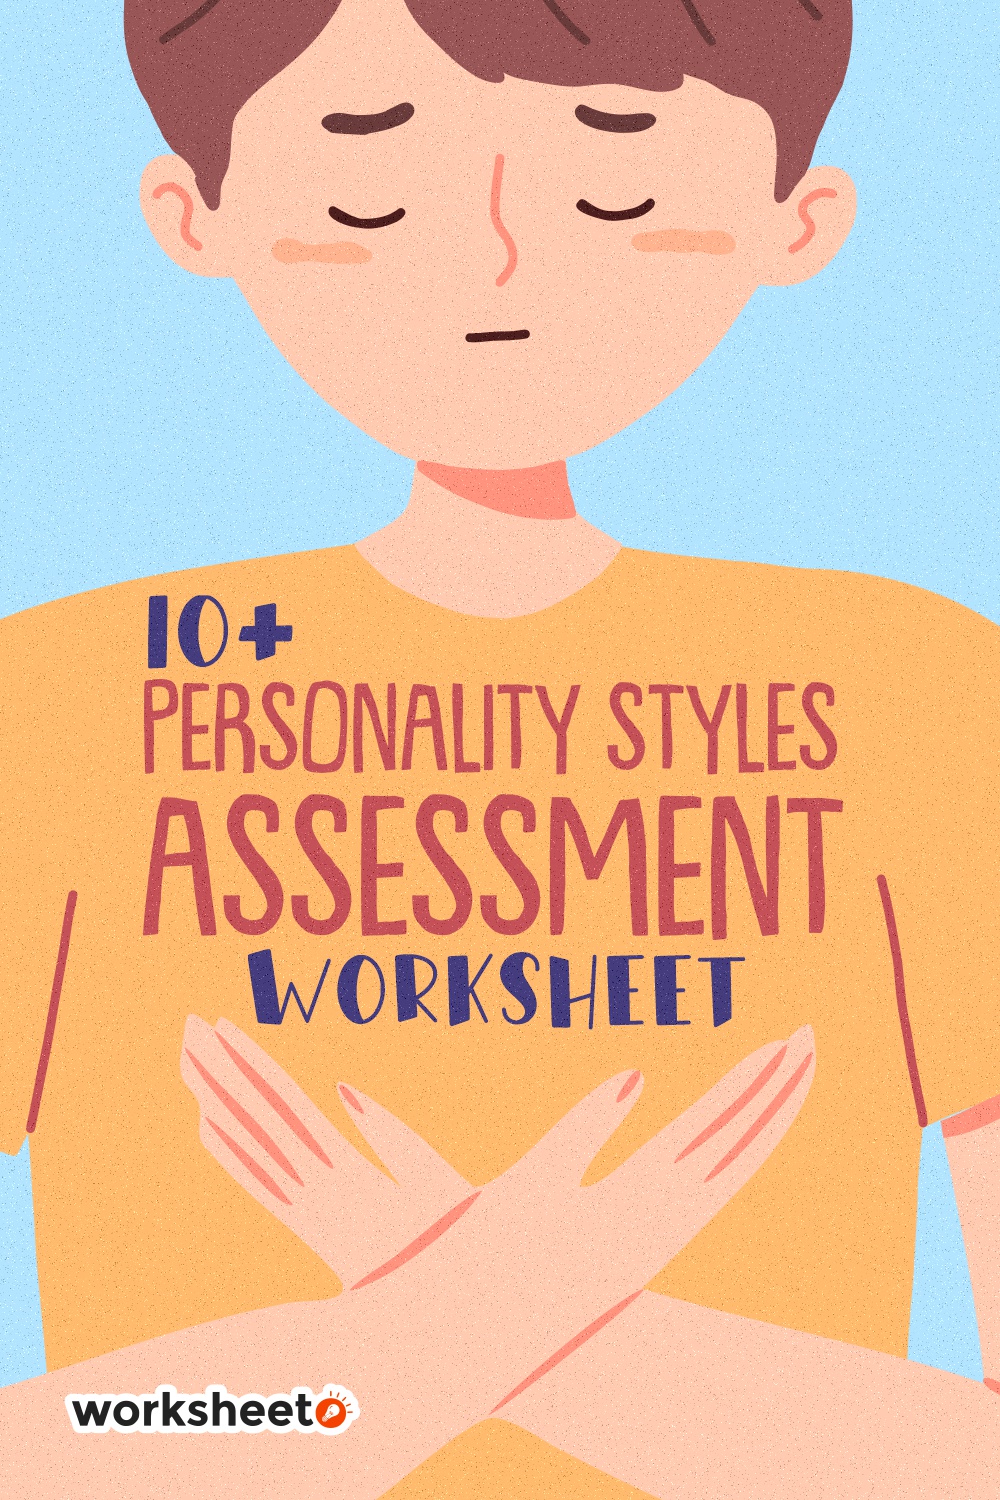 Personality Styles Assessment Worksheet